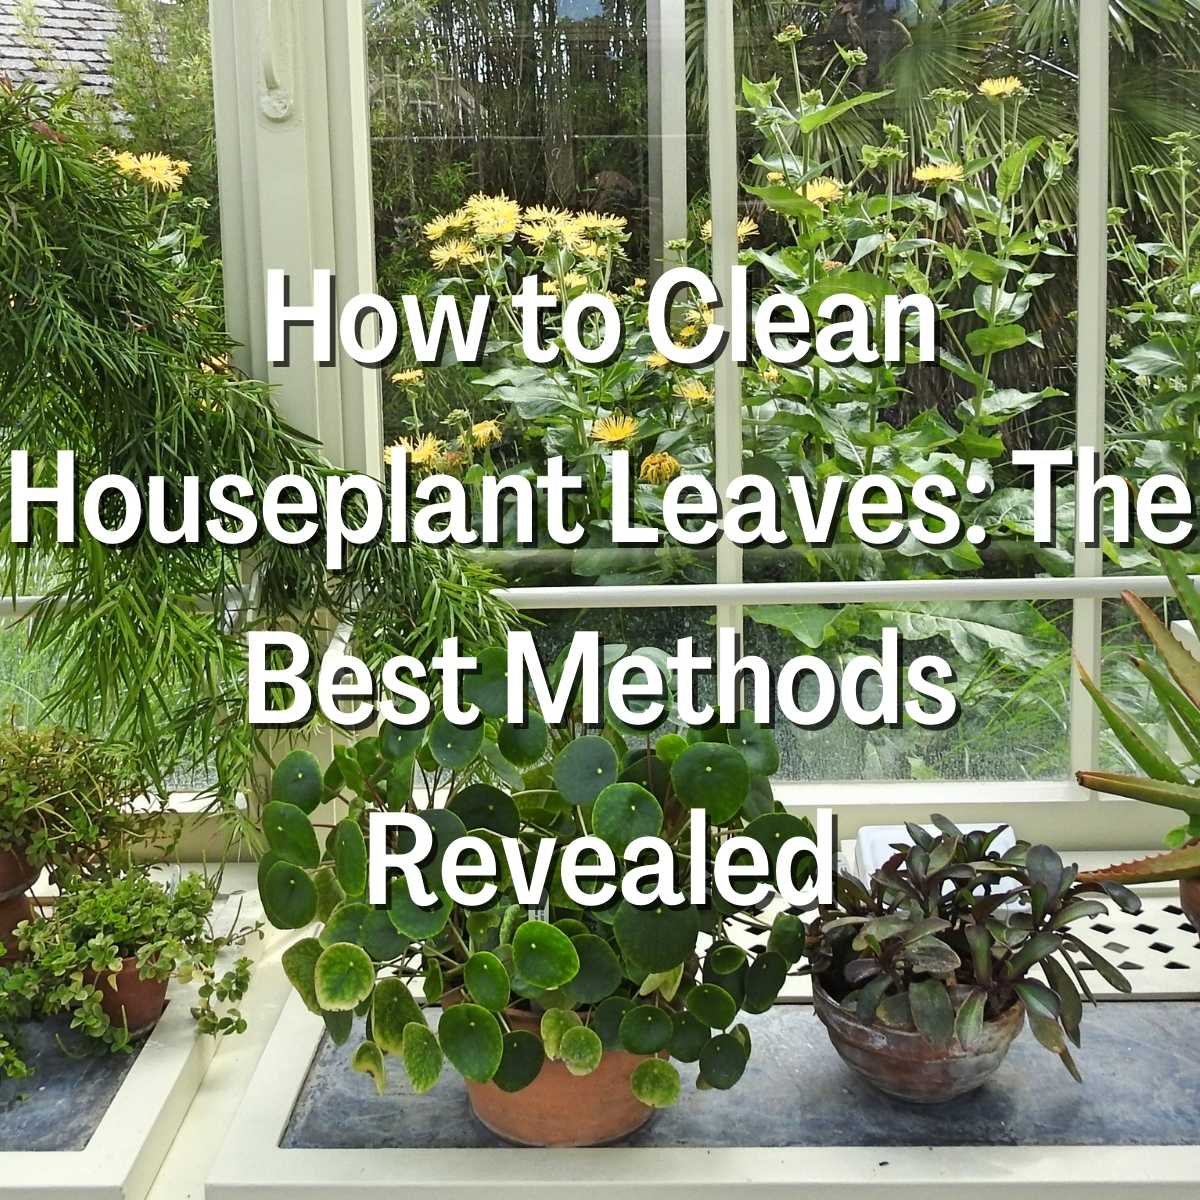 How to Clean Houseplant Leaves